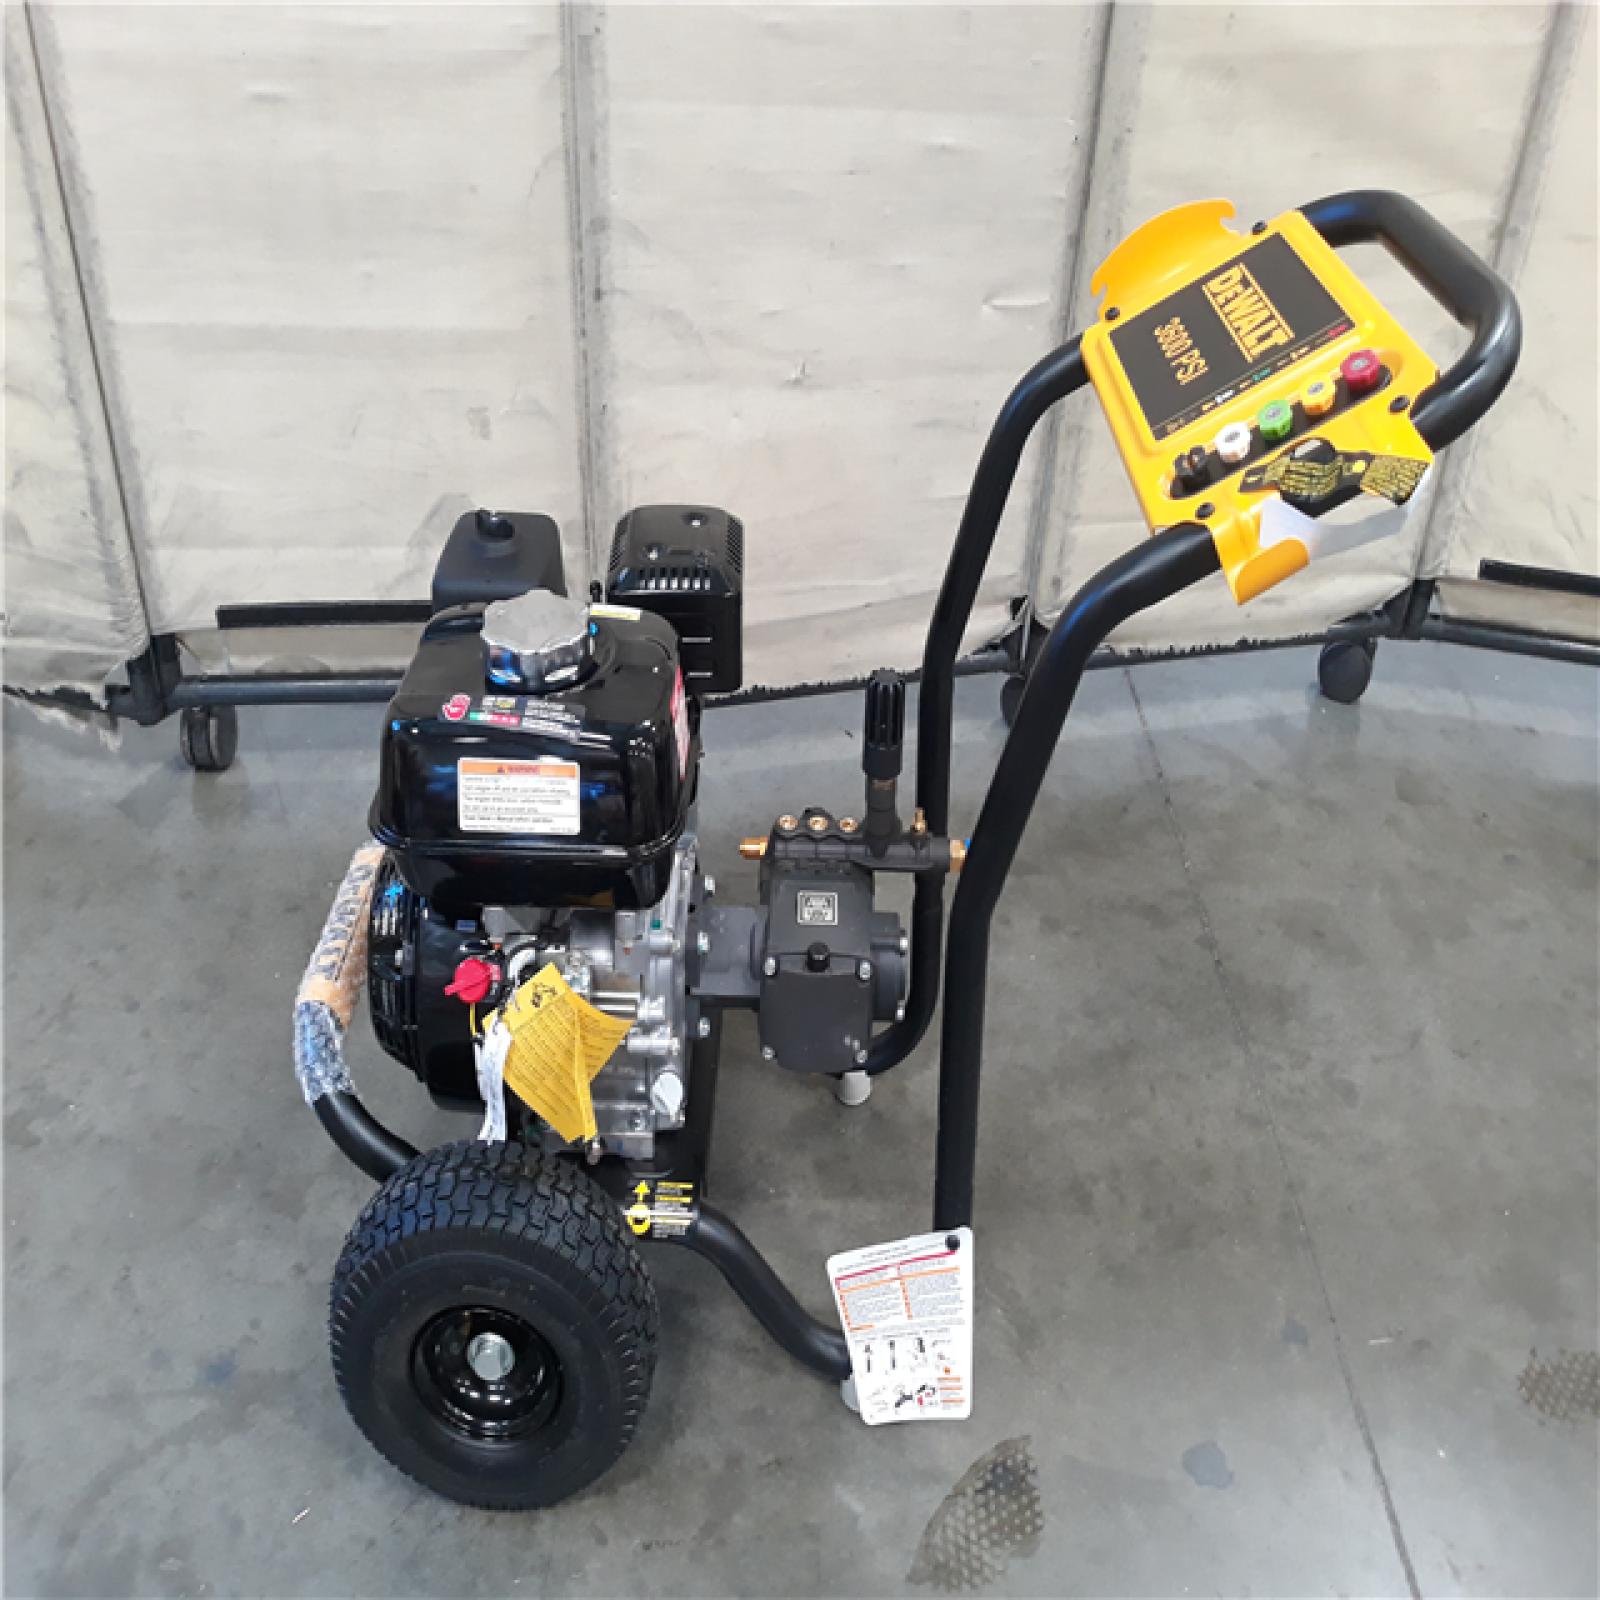 California AS-IS DeWalt 3600 Gas Pressure Washer -  Appears in New Condition